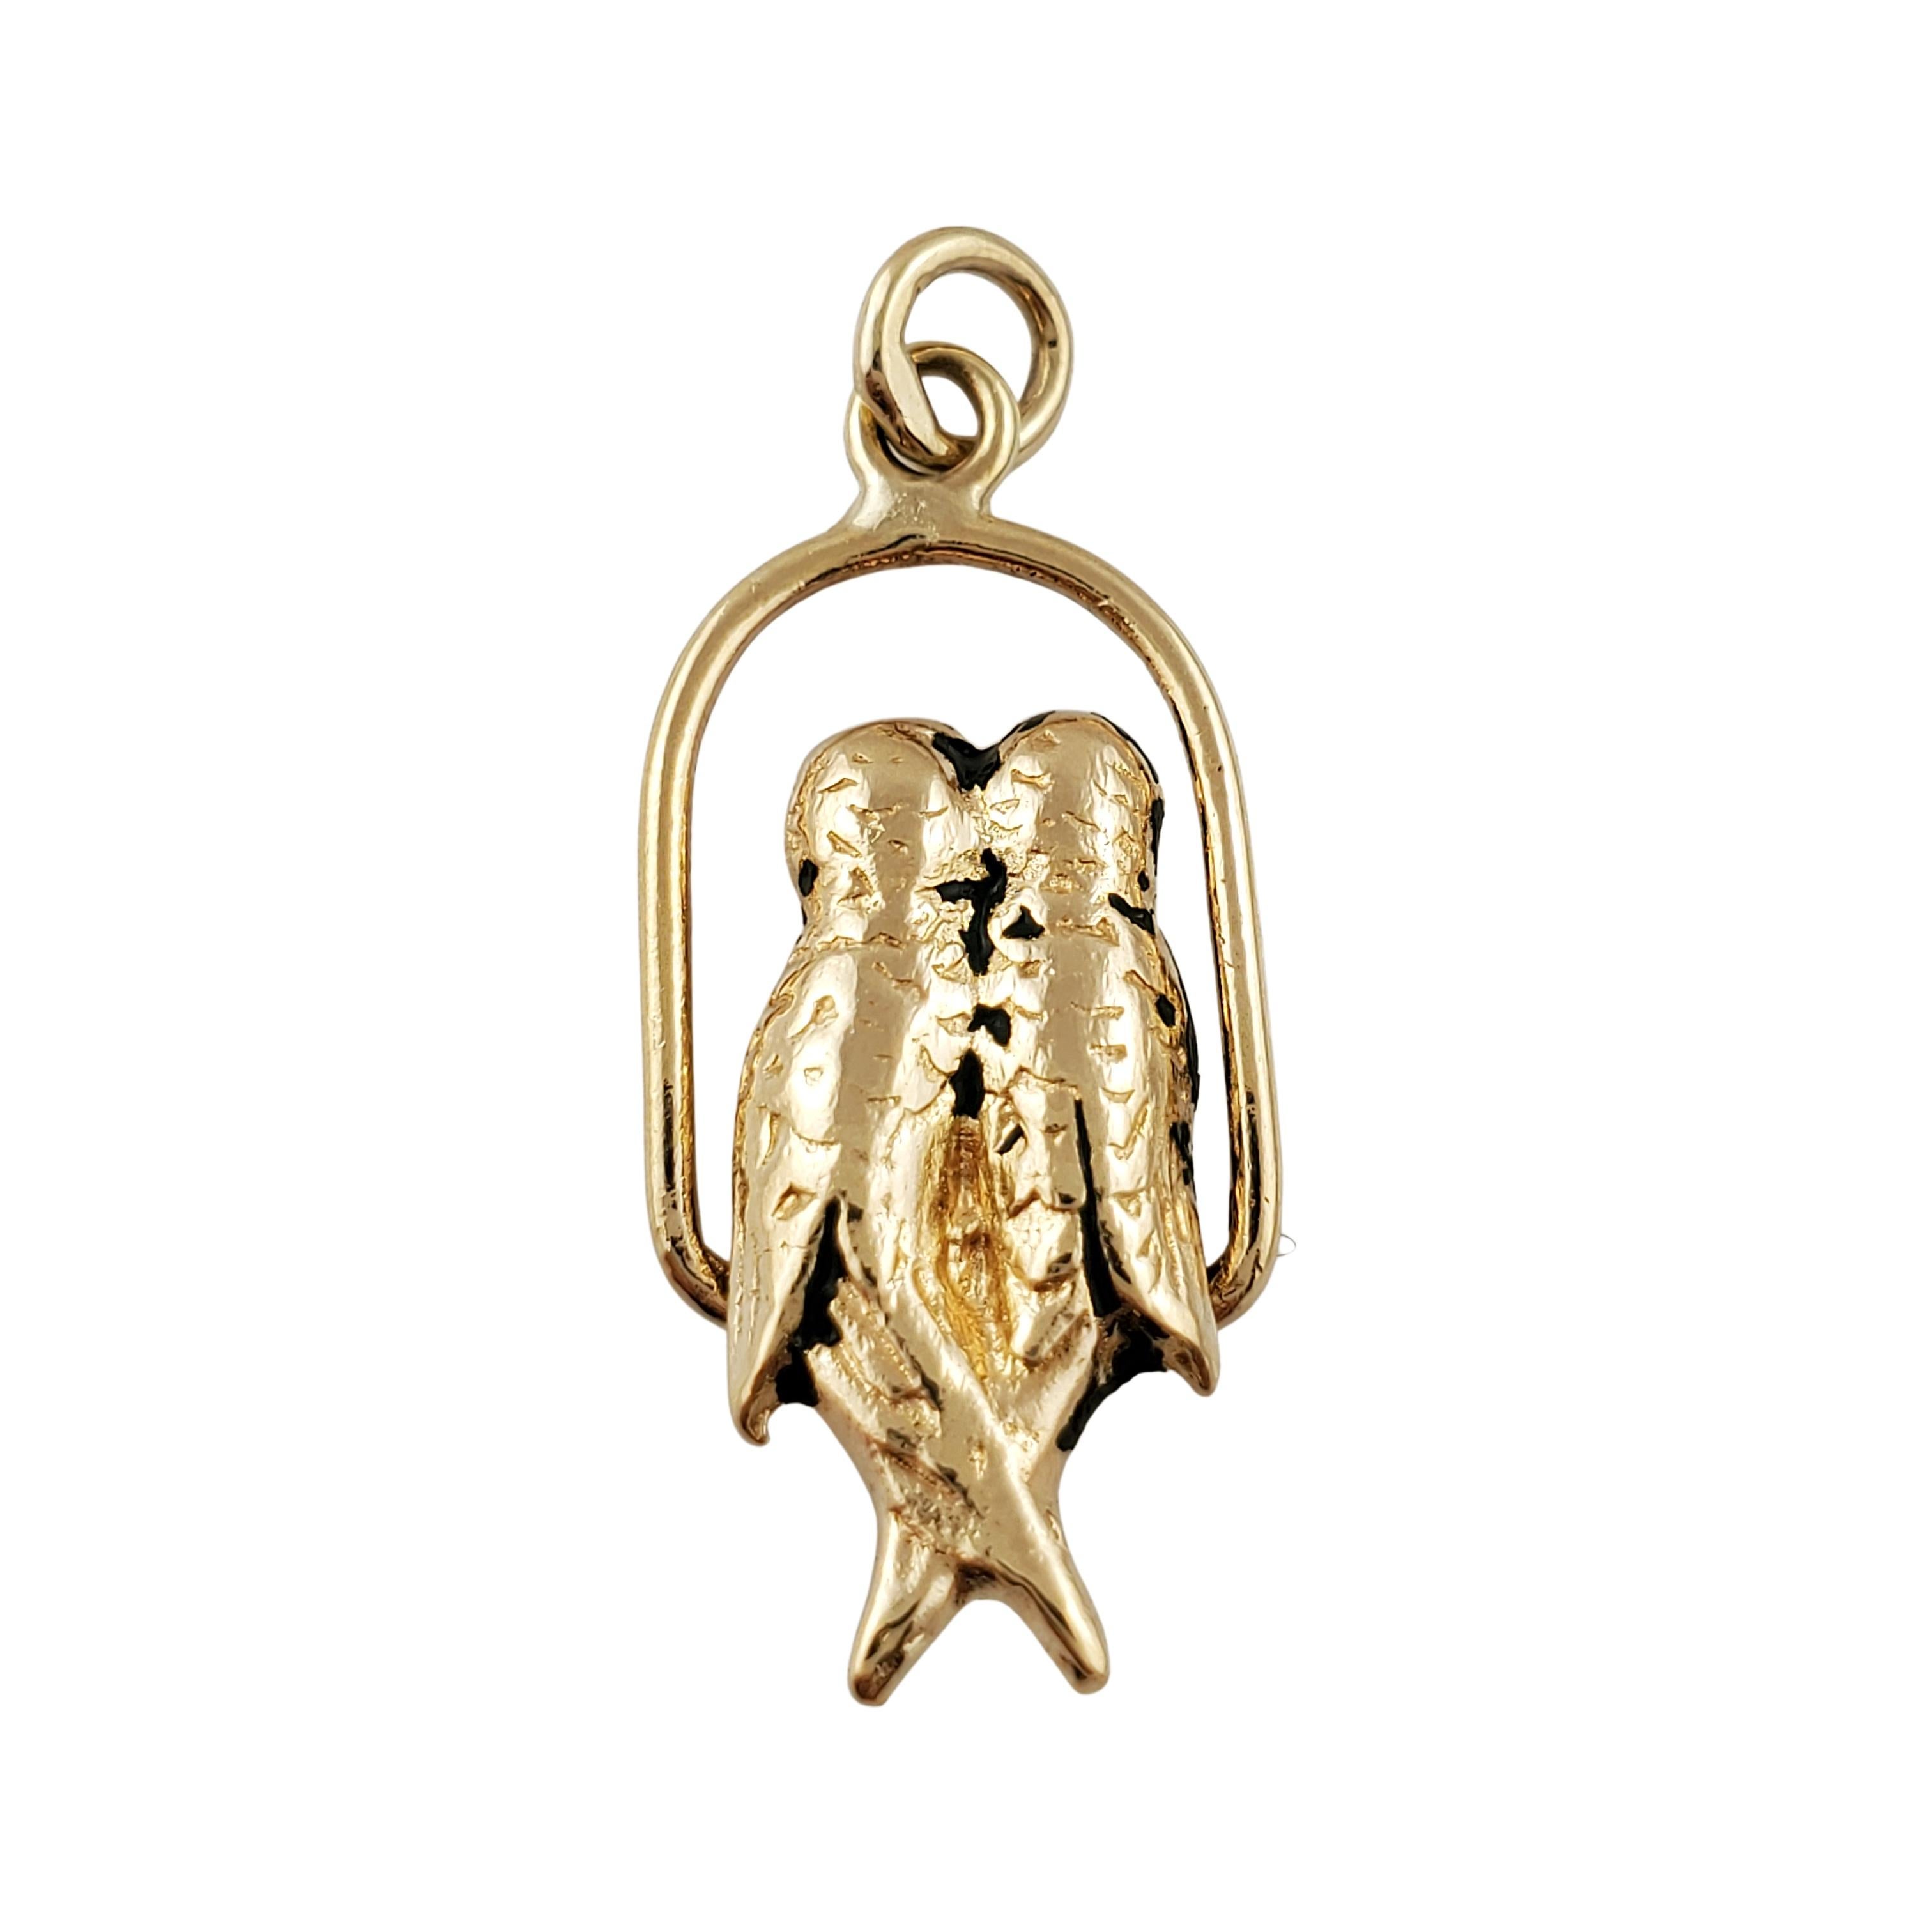 Vintage 14K Yellow Gold Bird on a Perch Pendant Charm

Beautiful birds on a perch charm appear to have two parrots sitting closely together enjoying each others company. This adorable charm is crafted in 14k yellow gold.

Size: 21mm X 10mm

Weight: